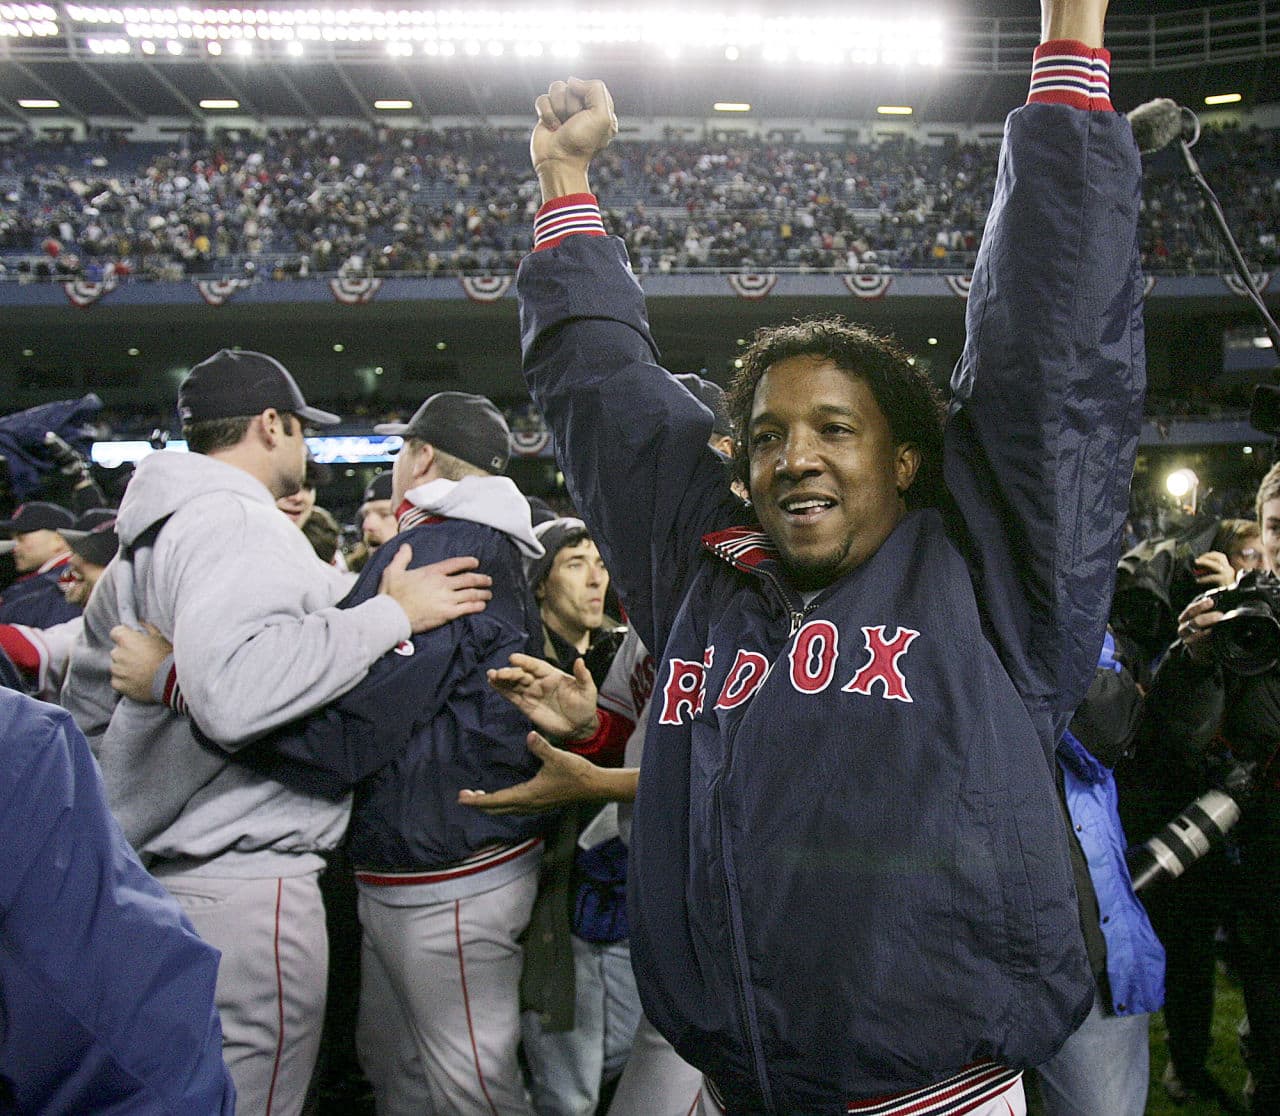 2004 red sox pedro